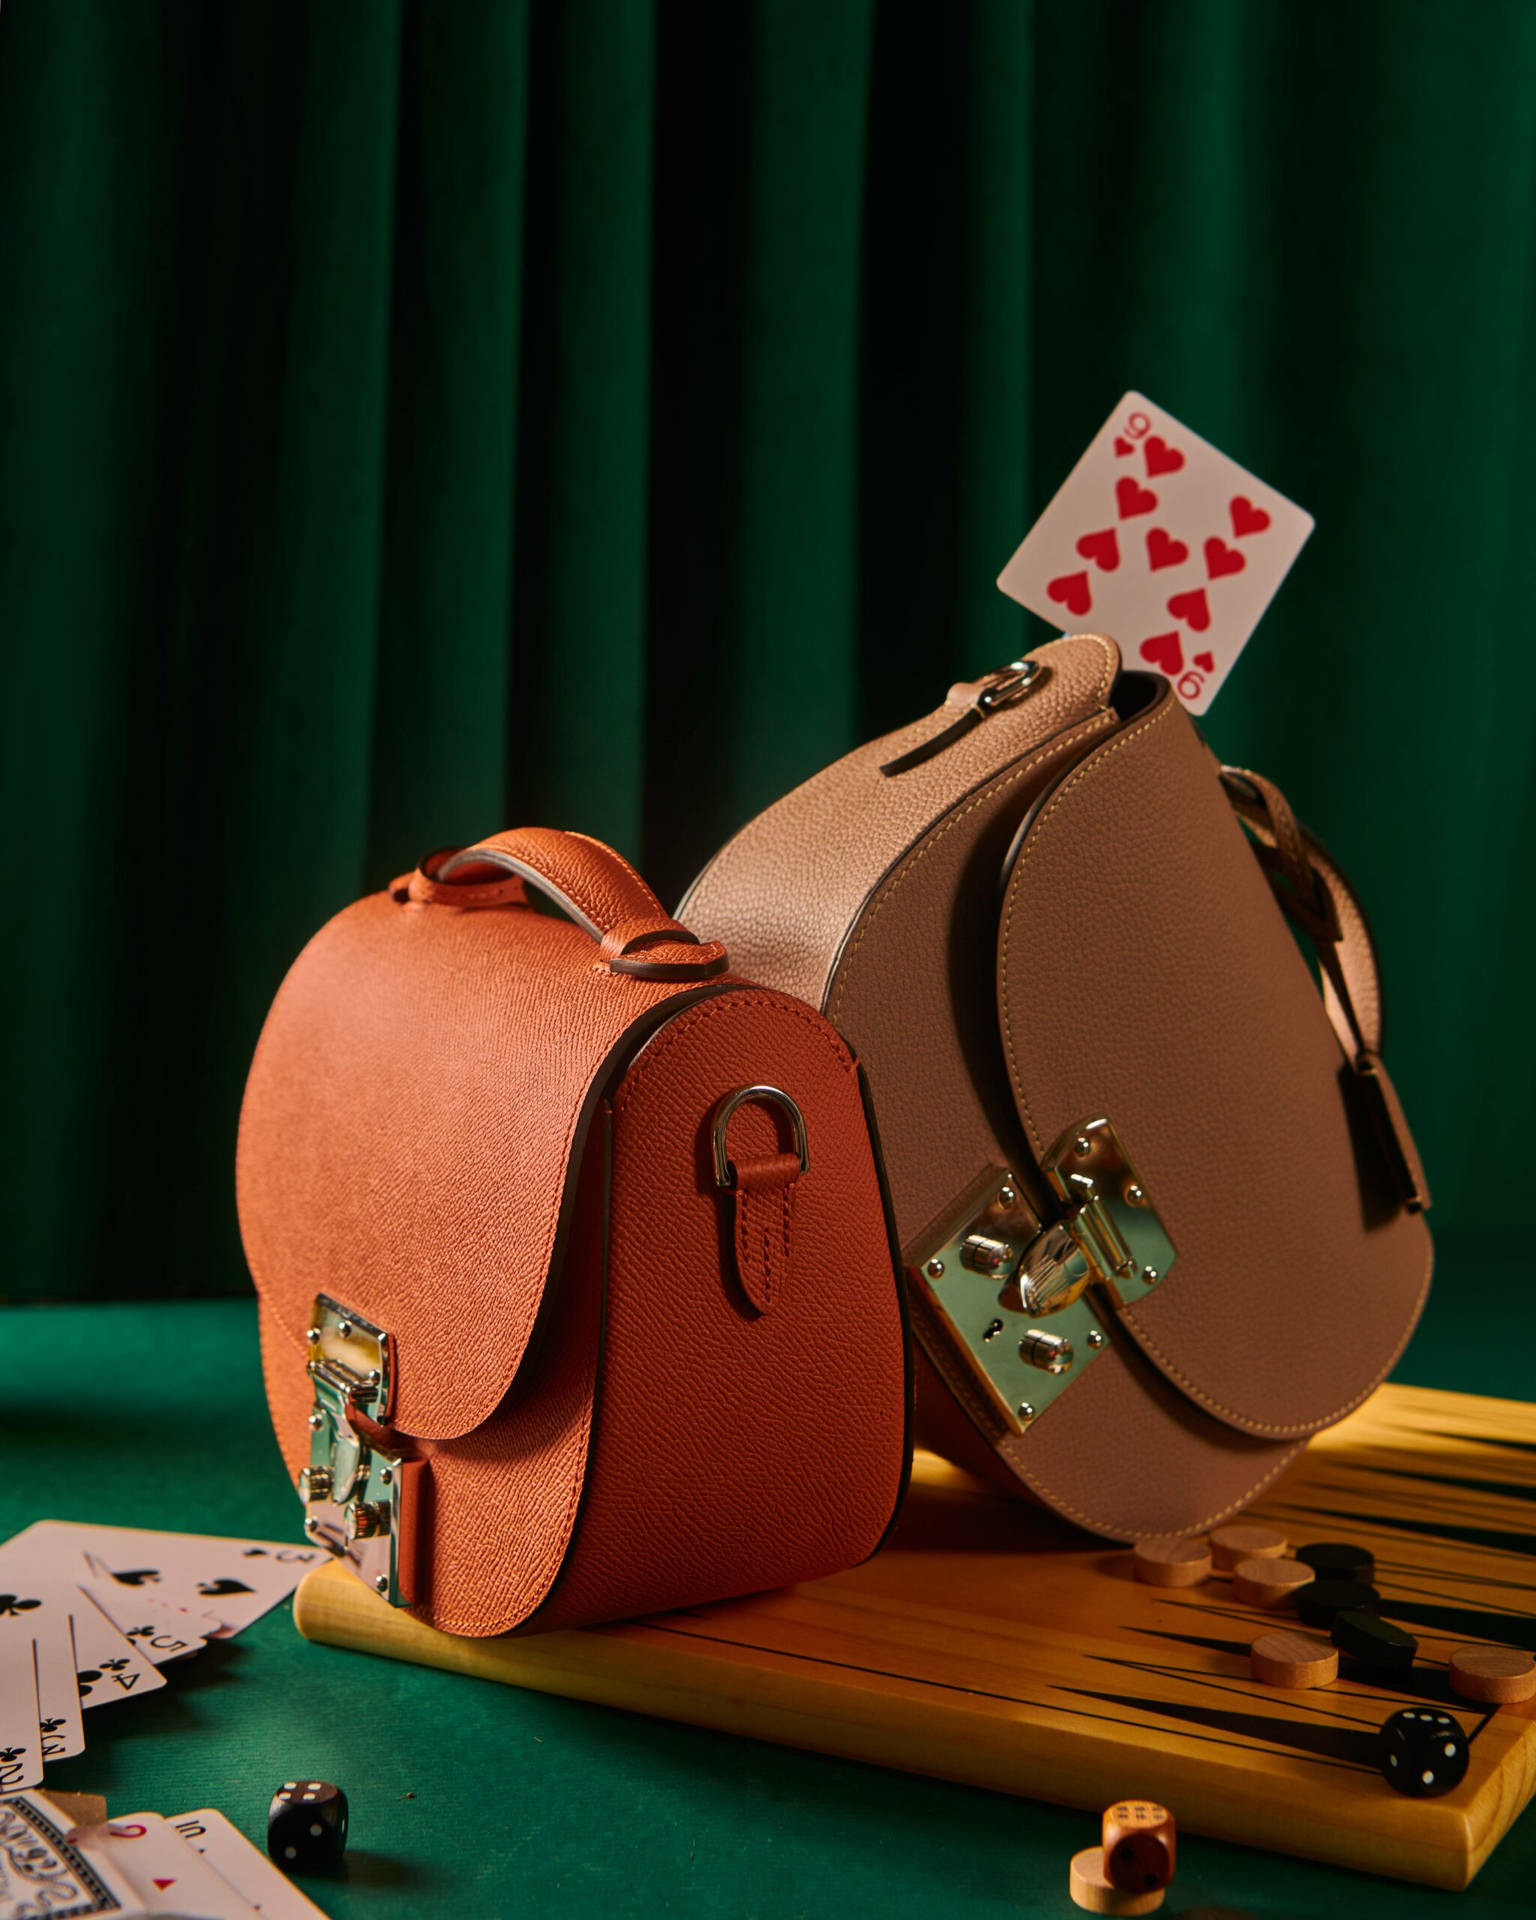 Download Get your hands on the exclusive Moynat Flori bag